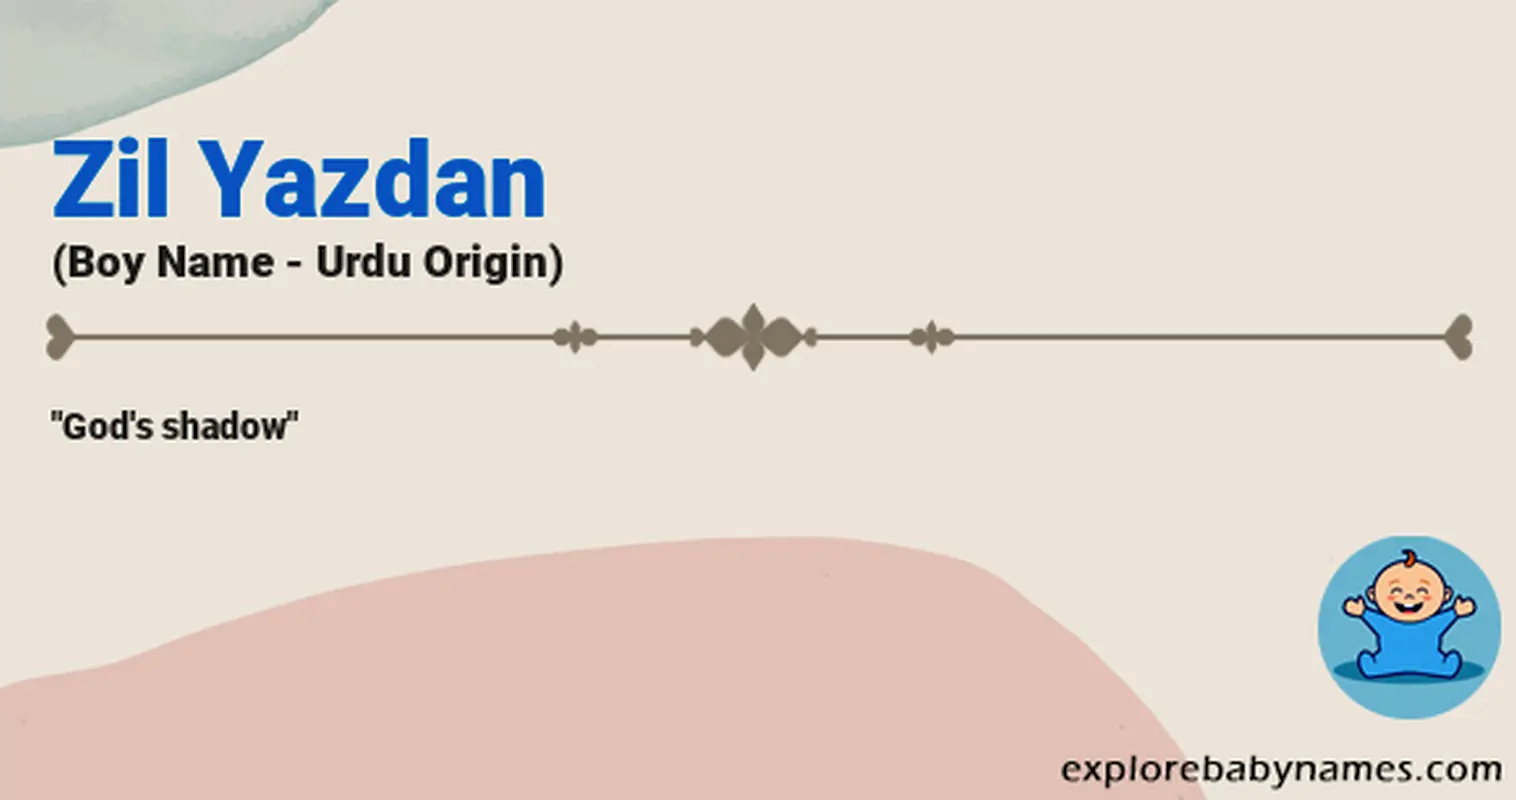 Meaning of Zil Yazdan